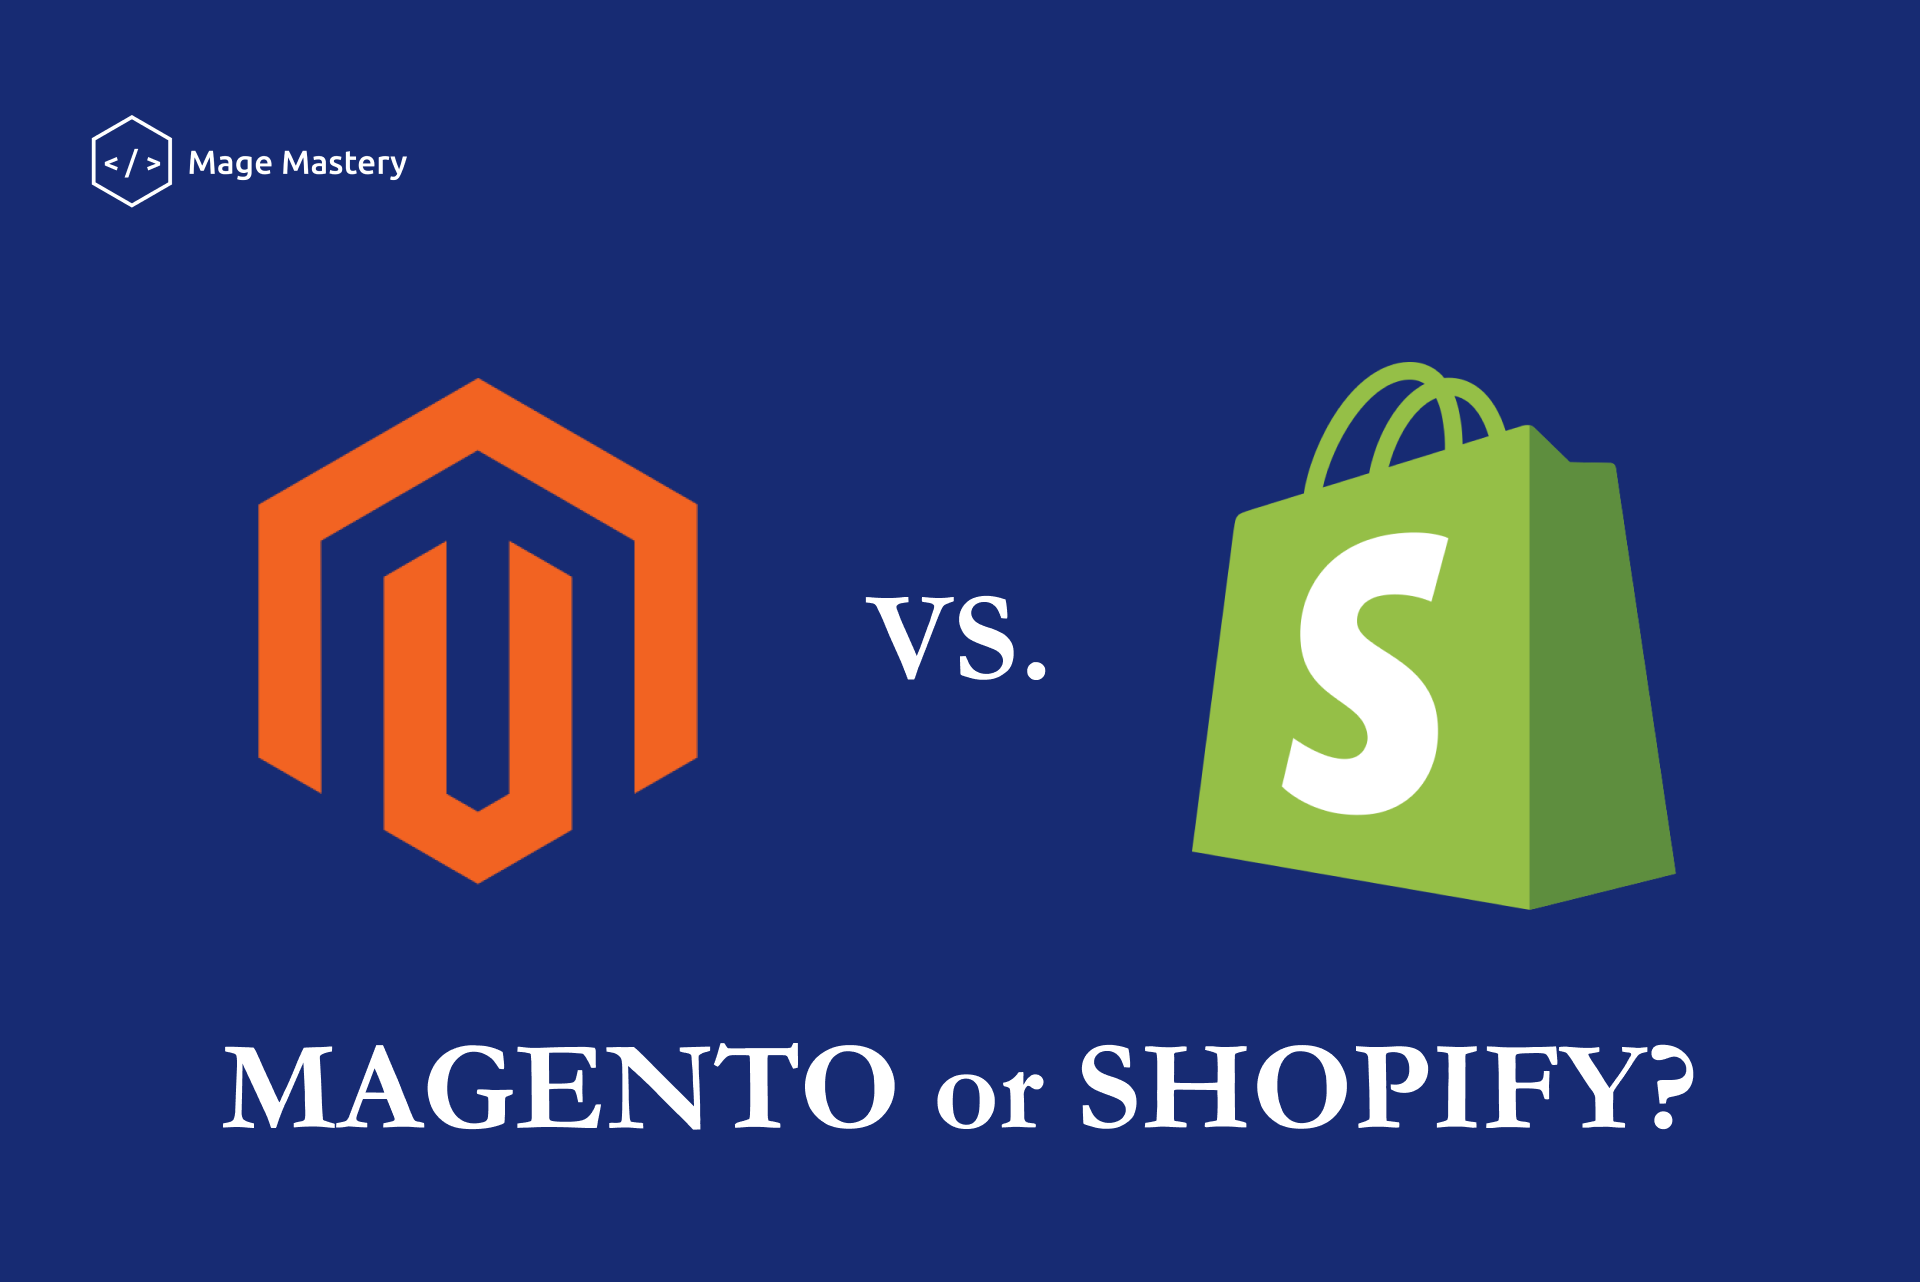 Magento vs. Shopify: what to choose?